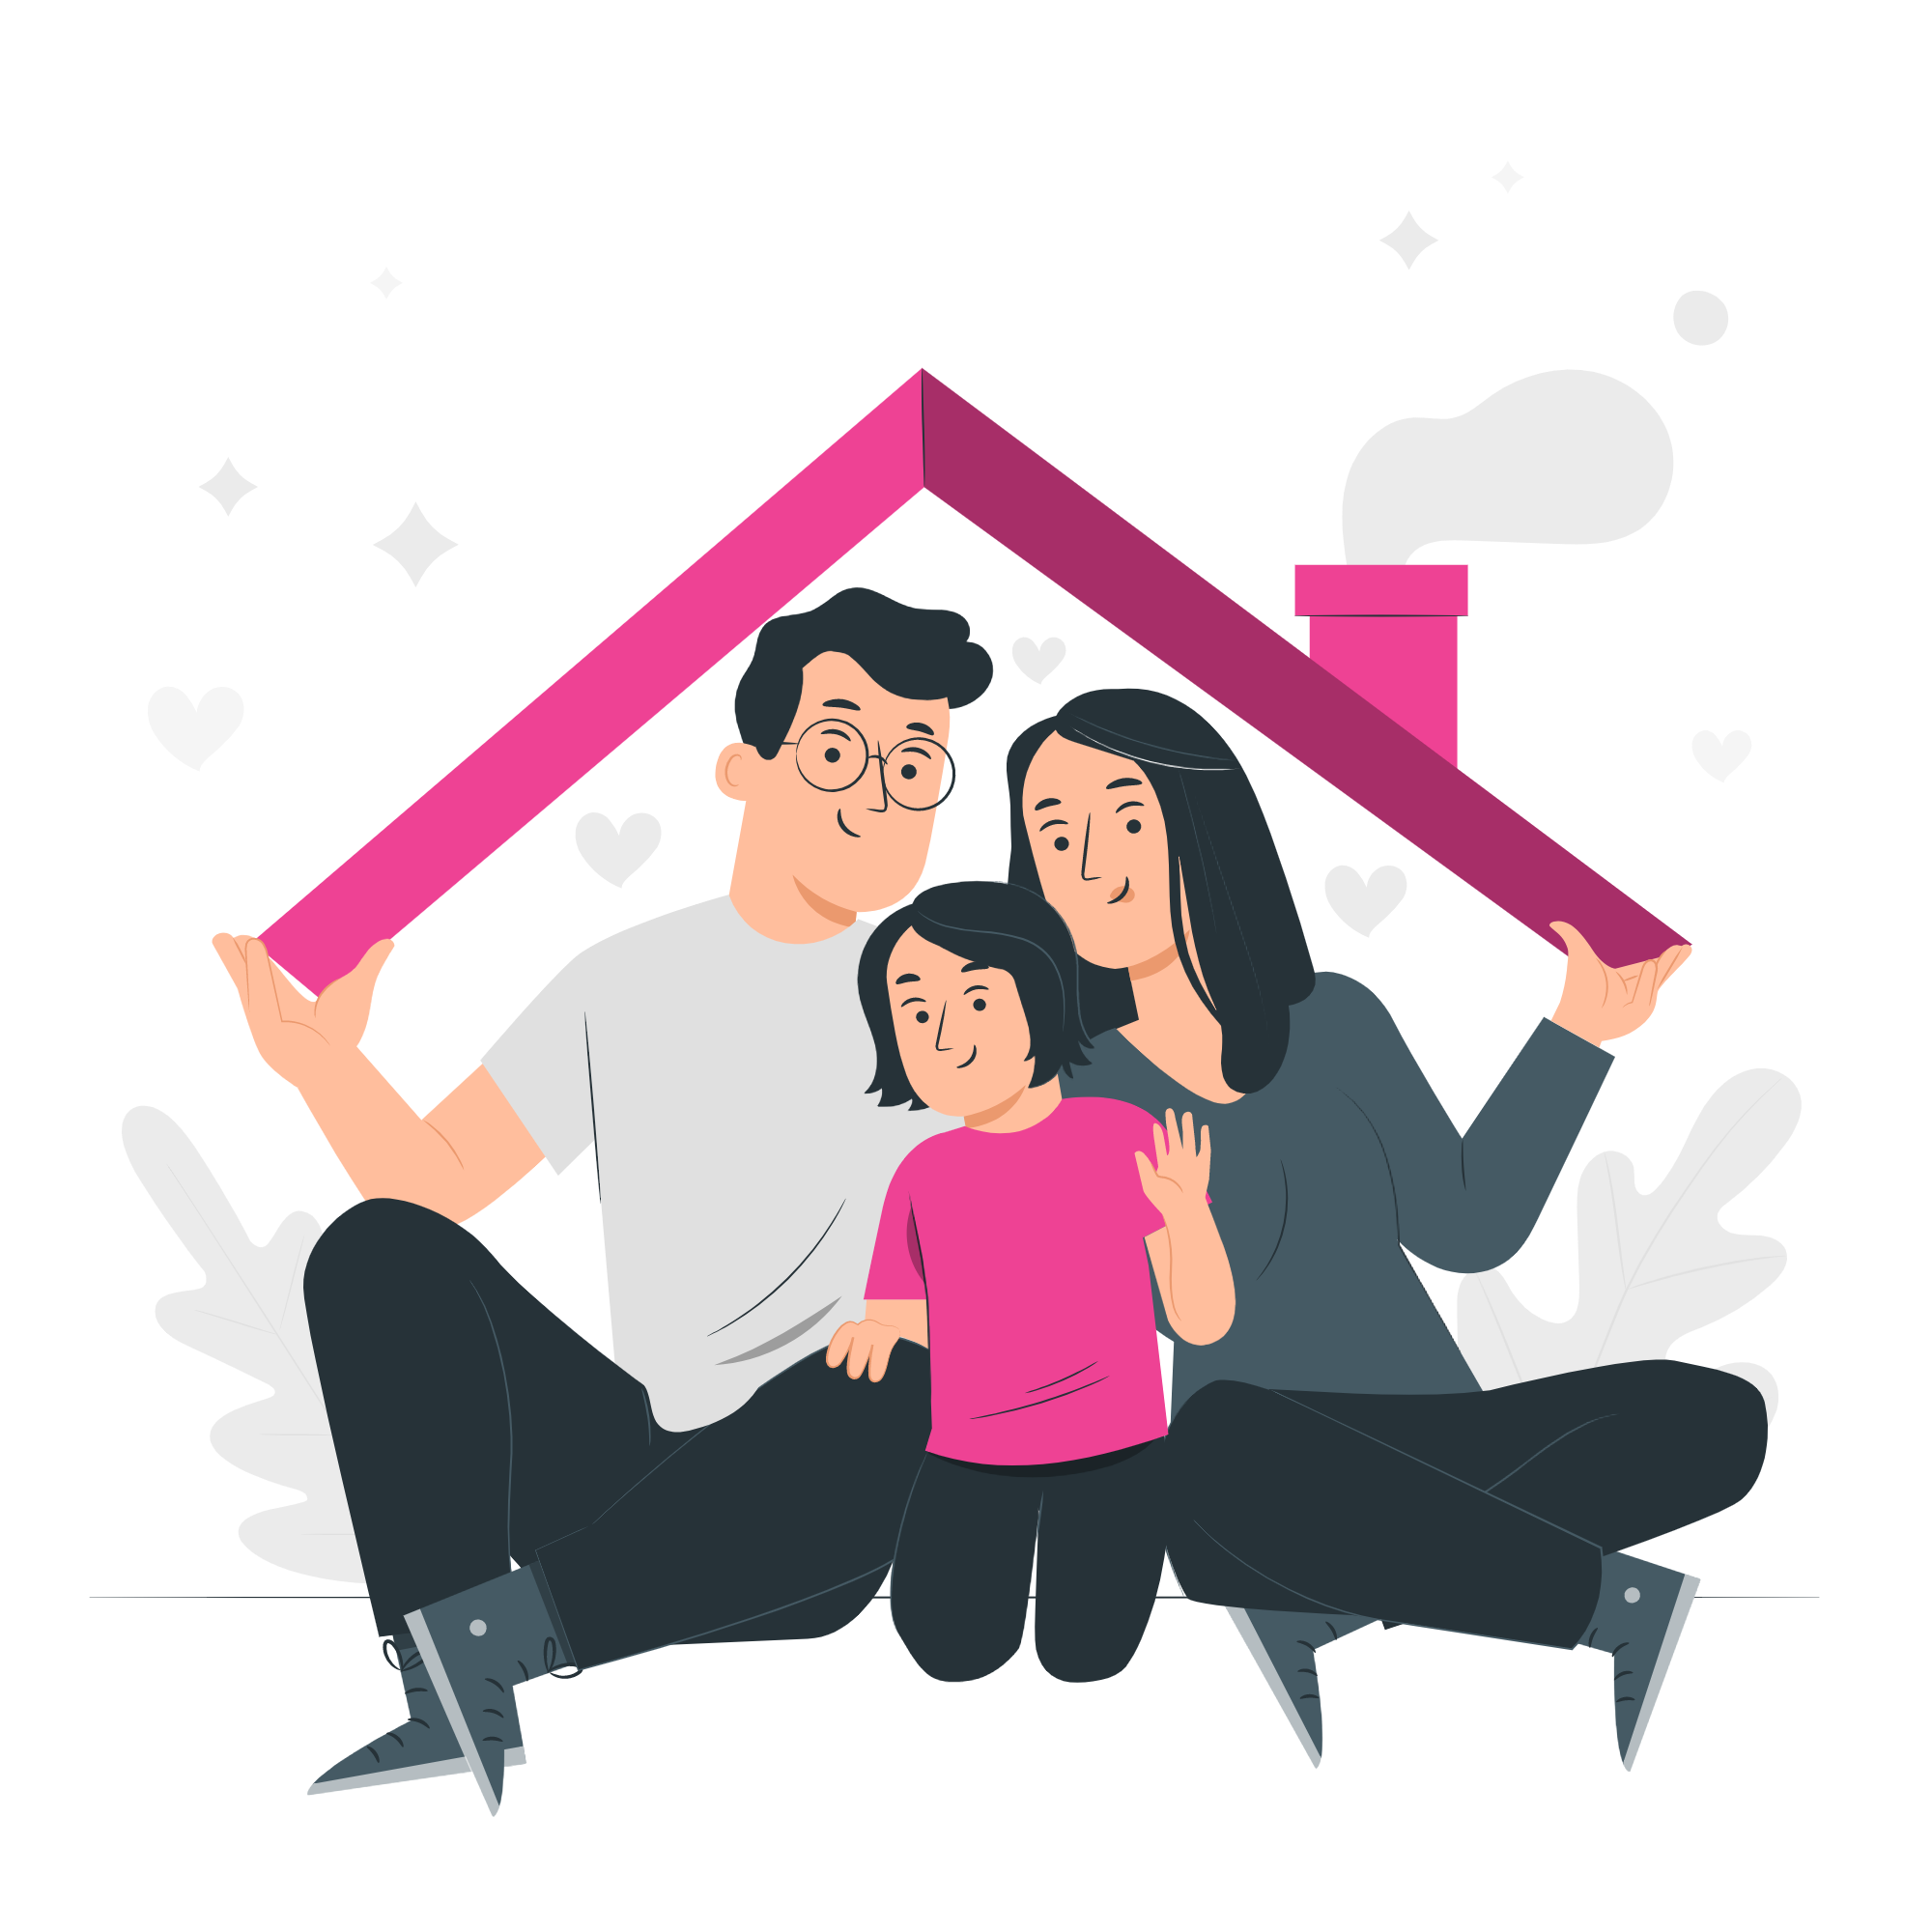 An illustrated family holding a roof over their heads